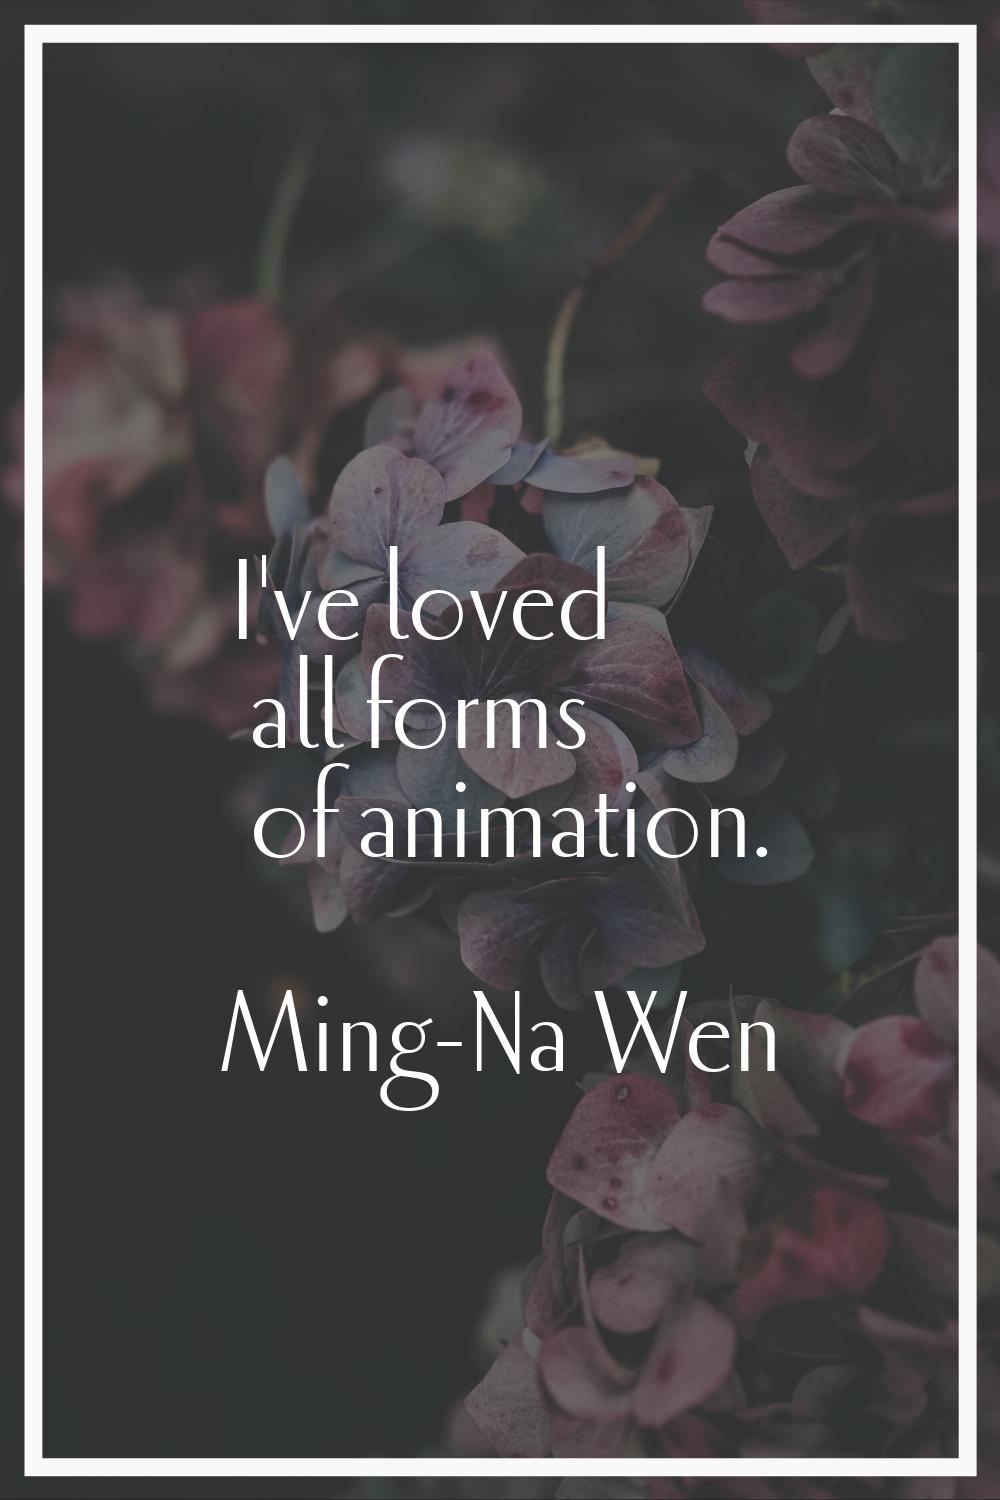 I've loved all forms of animation.